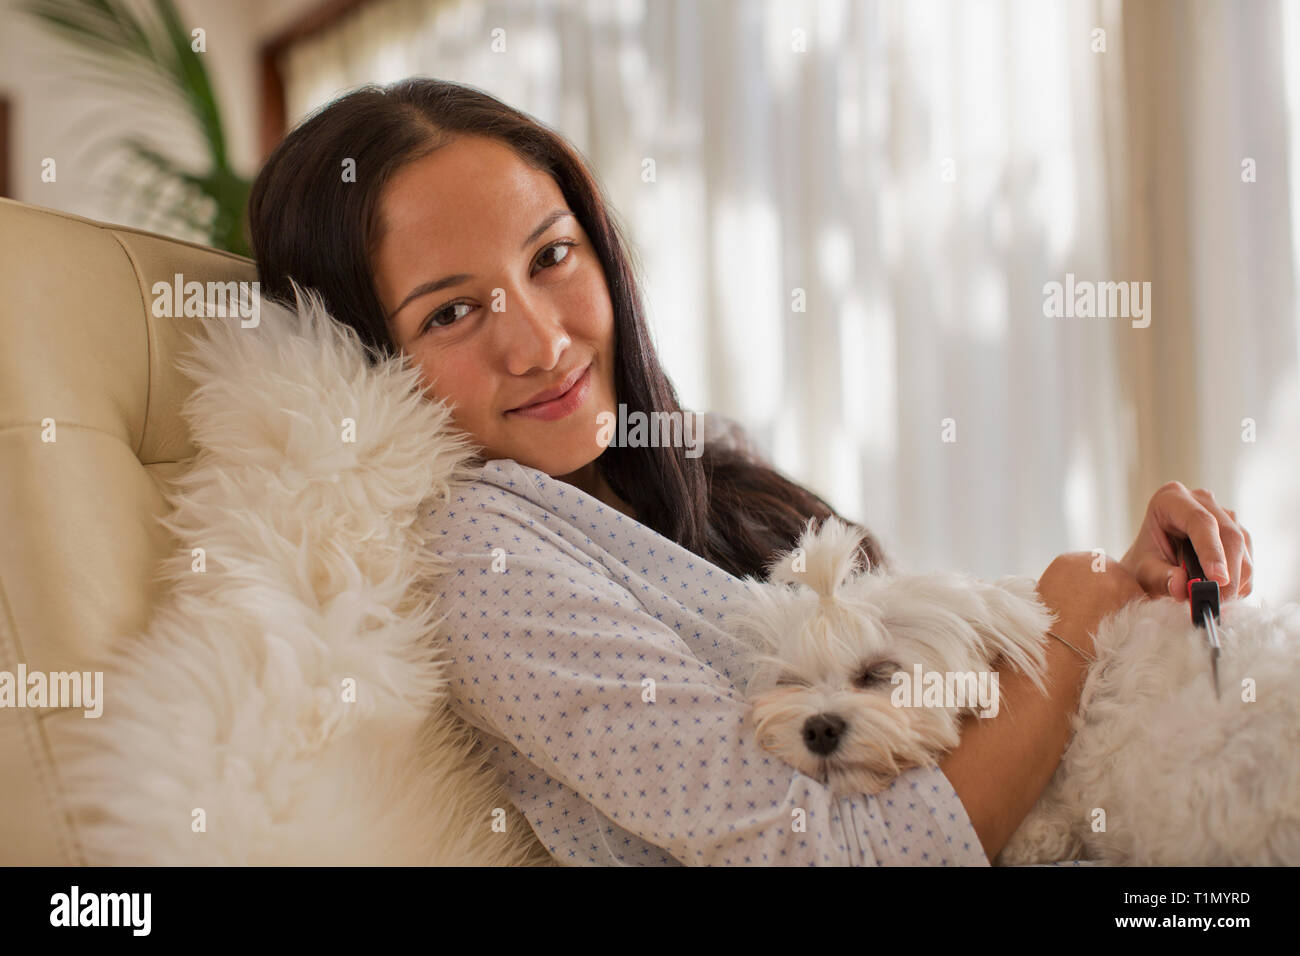 Portrait of smiling young woman cuddling with dog Banque D'Images